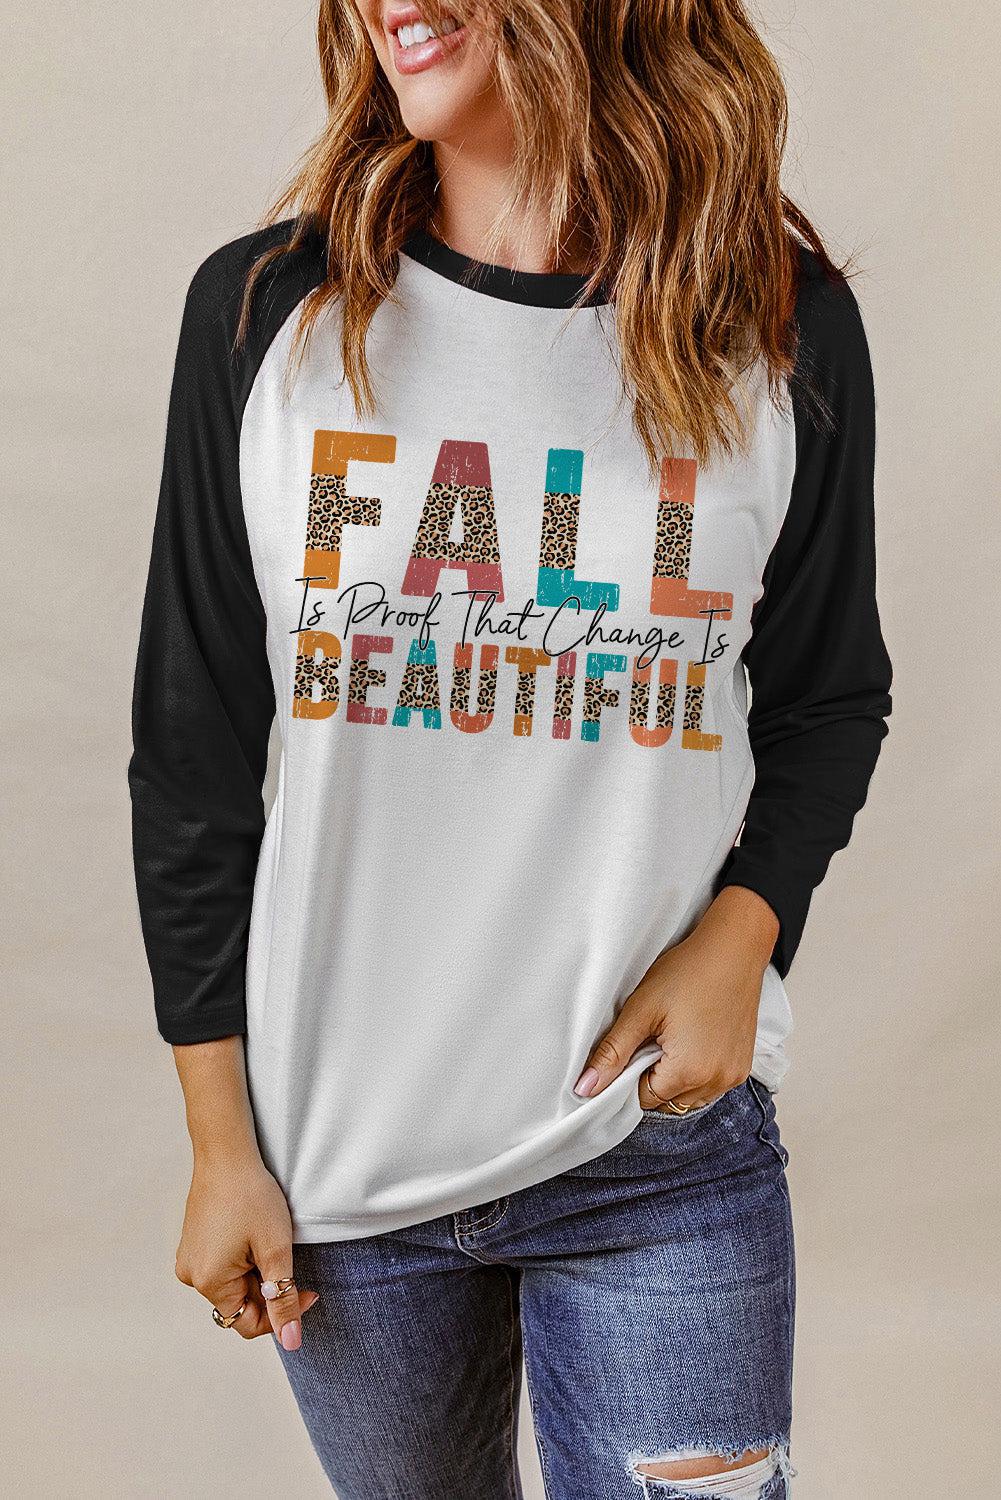 Round Neck Long Sleeve FALL IS PROOF THAT CHANGE IS BEAUTIFUL Graphic Tee BLUE ZONE PLANET